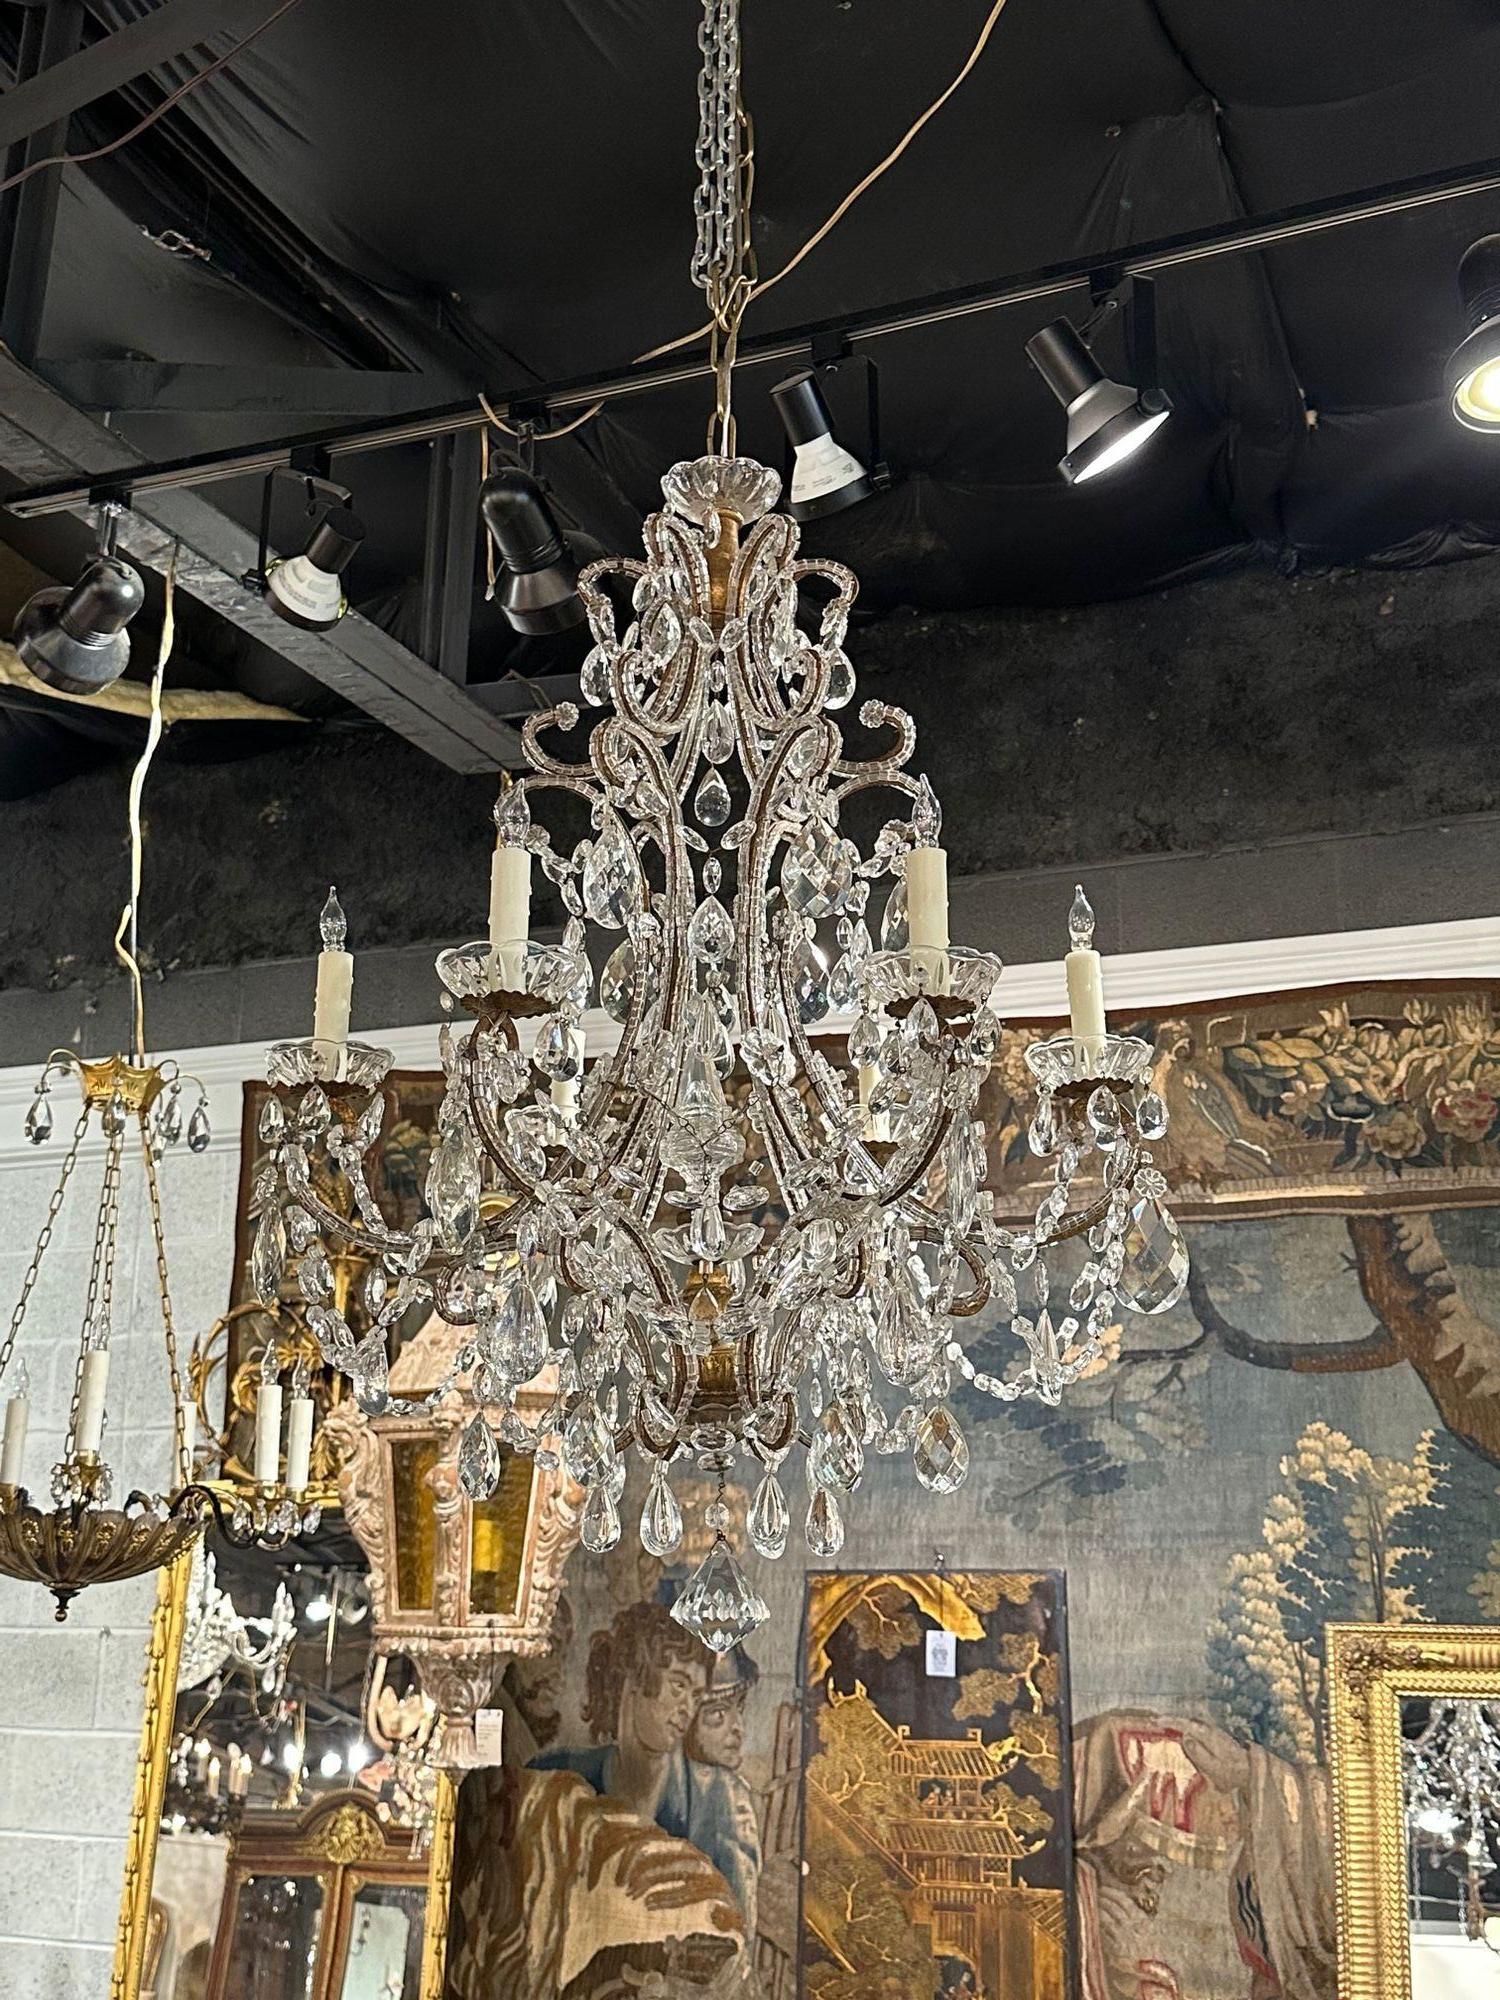 Fine quality late 19th century Italian beaded crystal 6 light chandelier. The chandelier has been professionally re-wired, cleaned and is ready to hang. Includes matching chain and canopy.